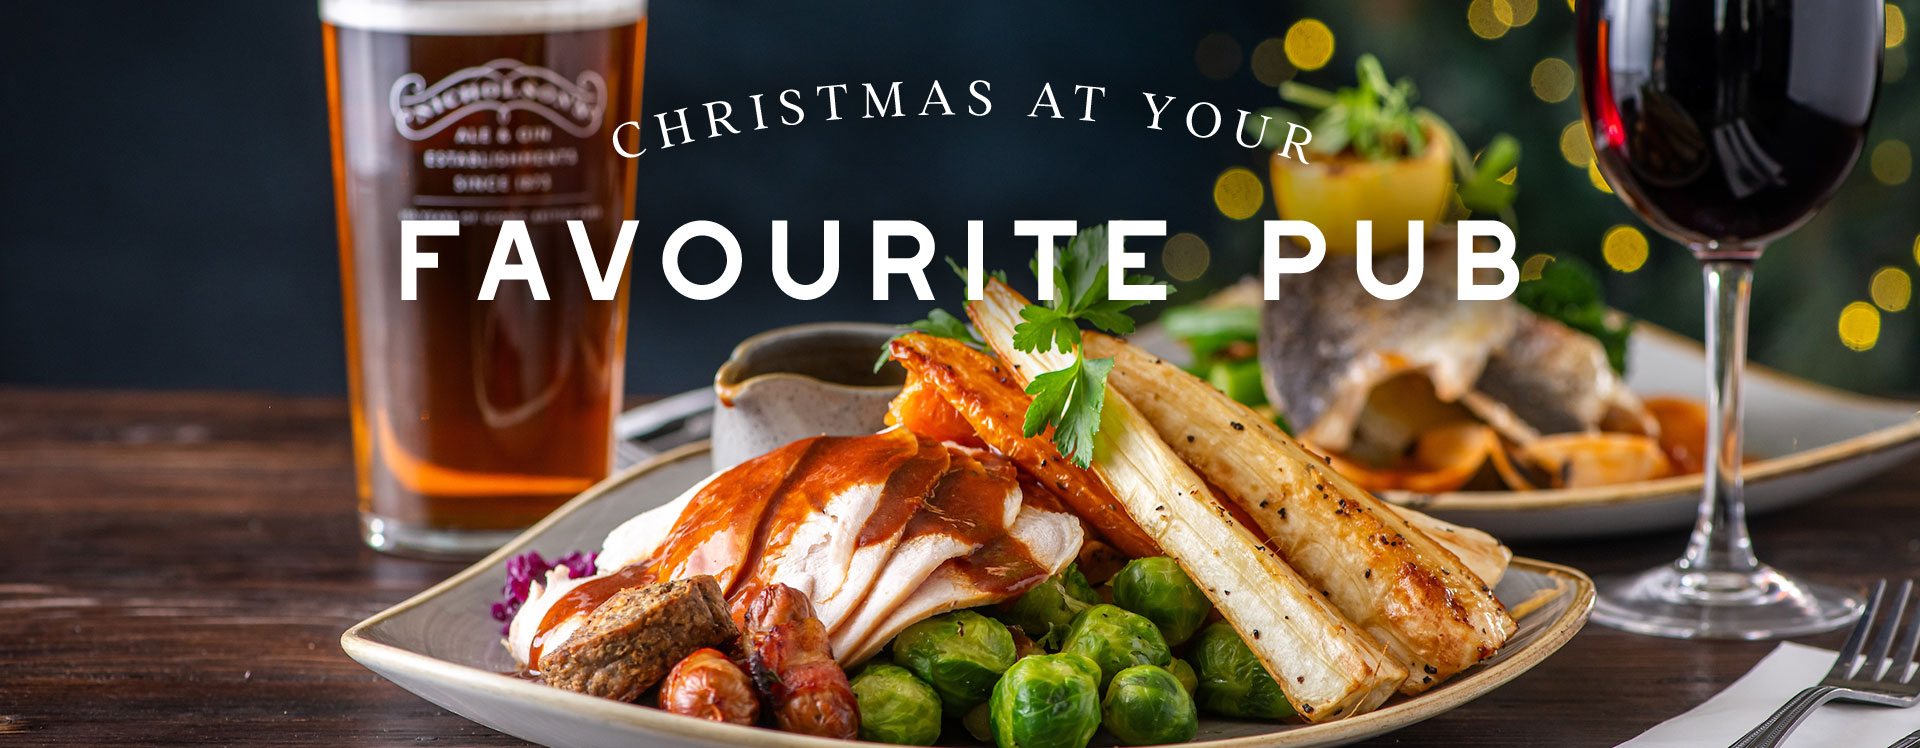 Christmas day menu at The Porcupine